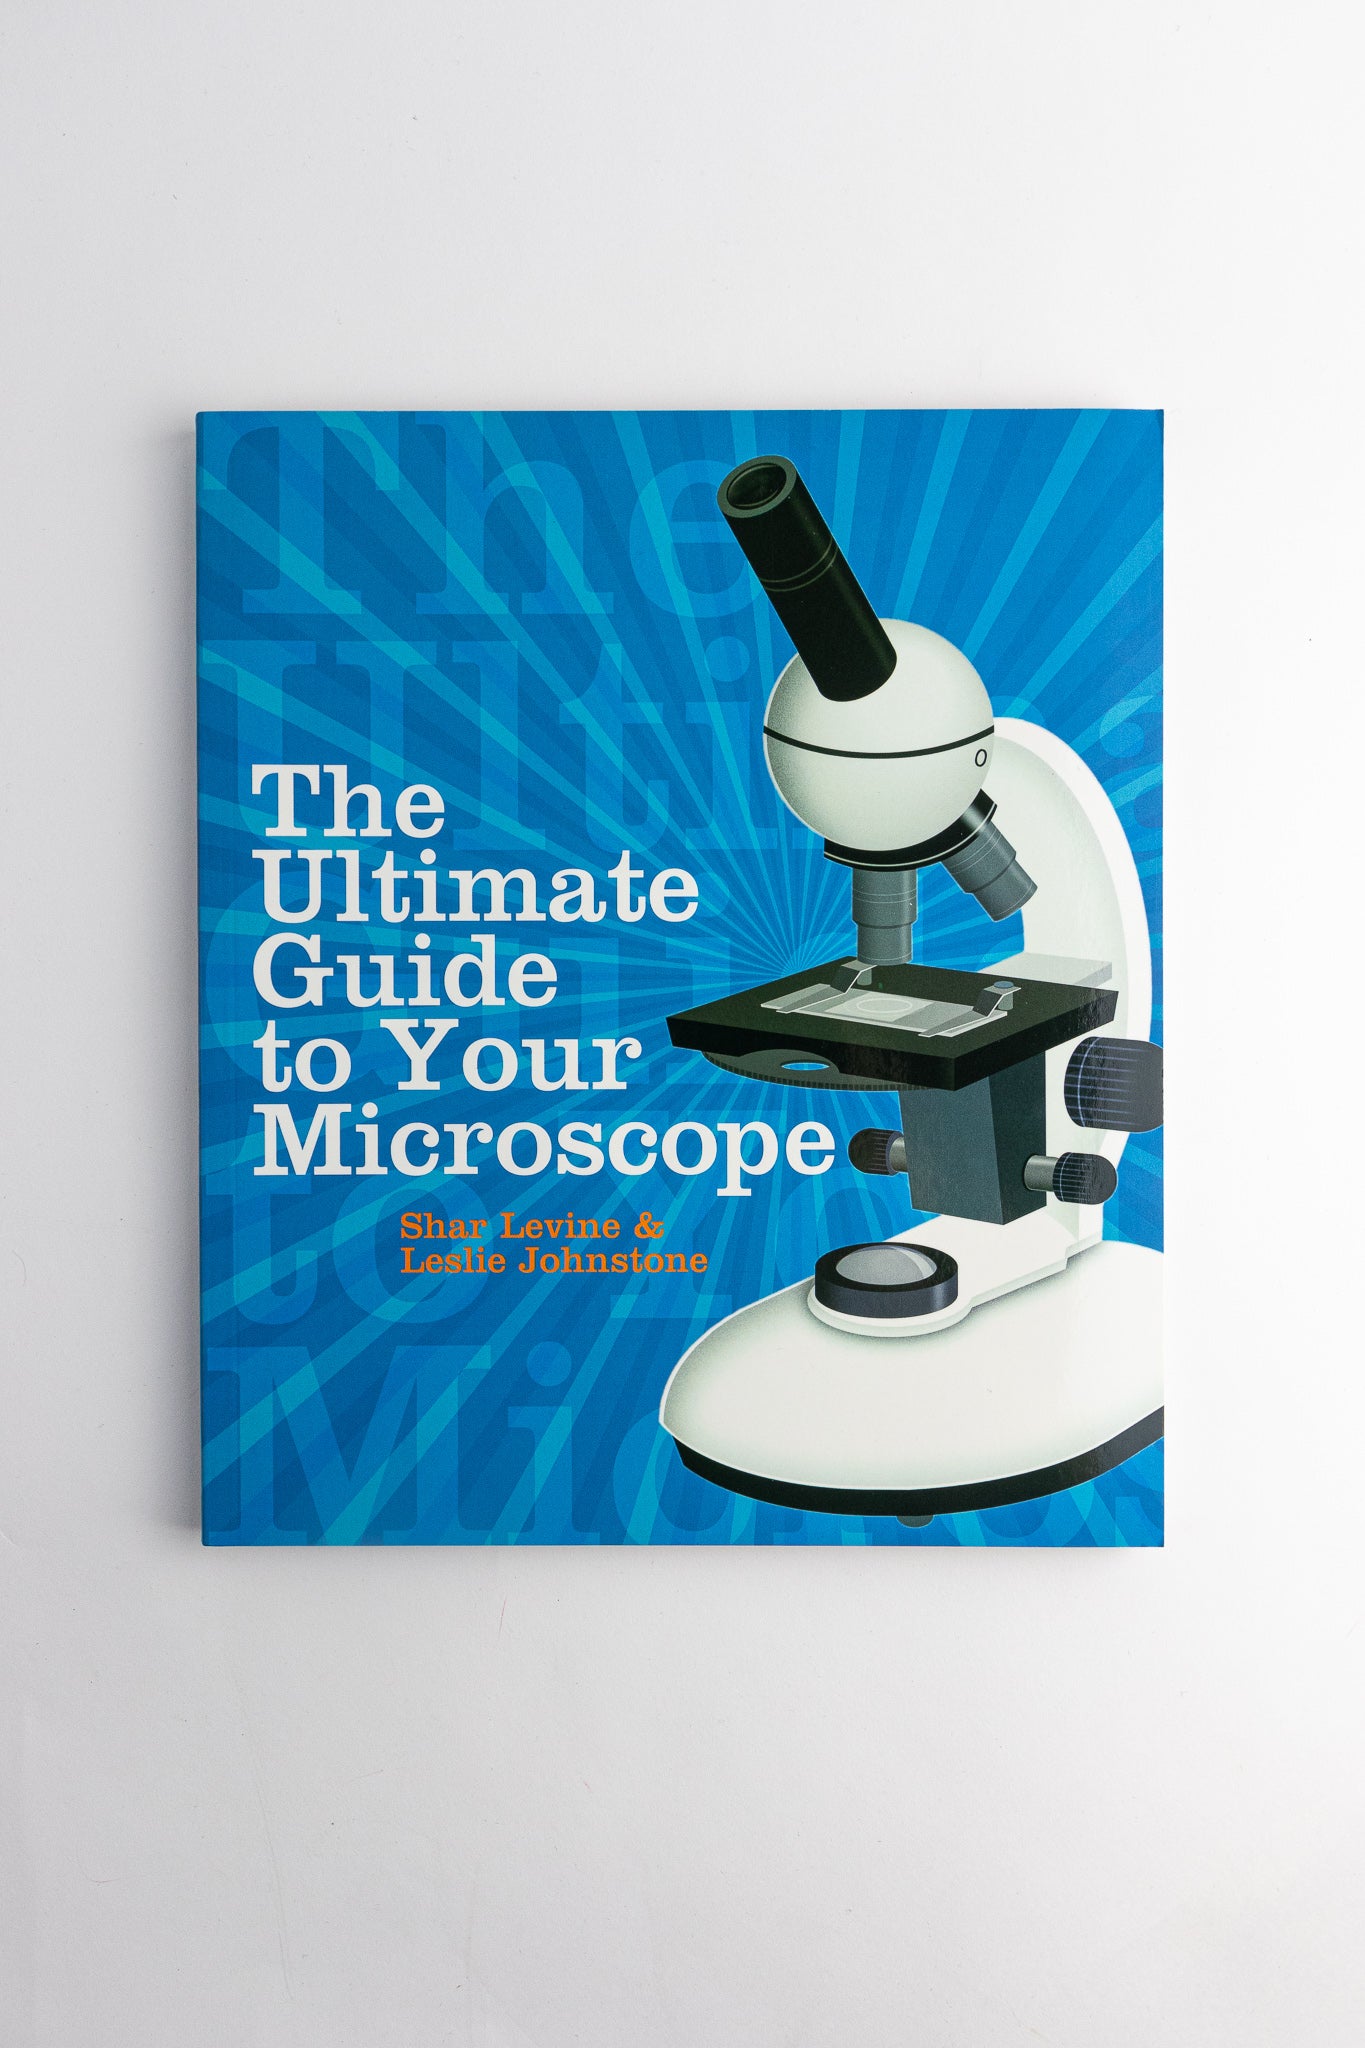 The Ultimate Guide to Your Microscope